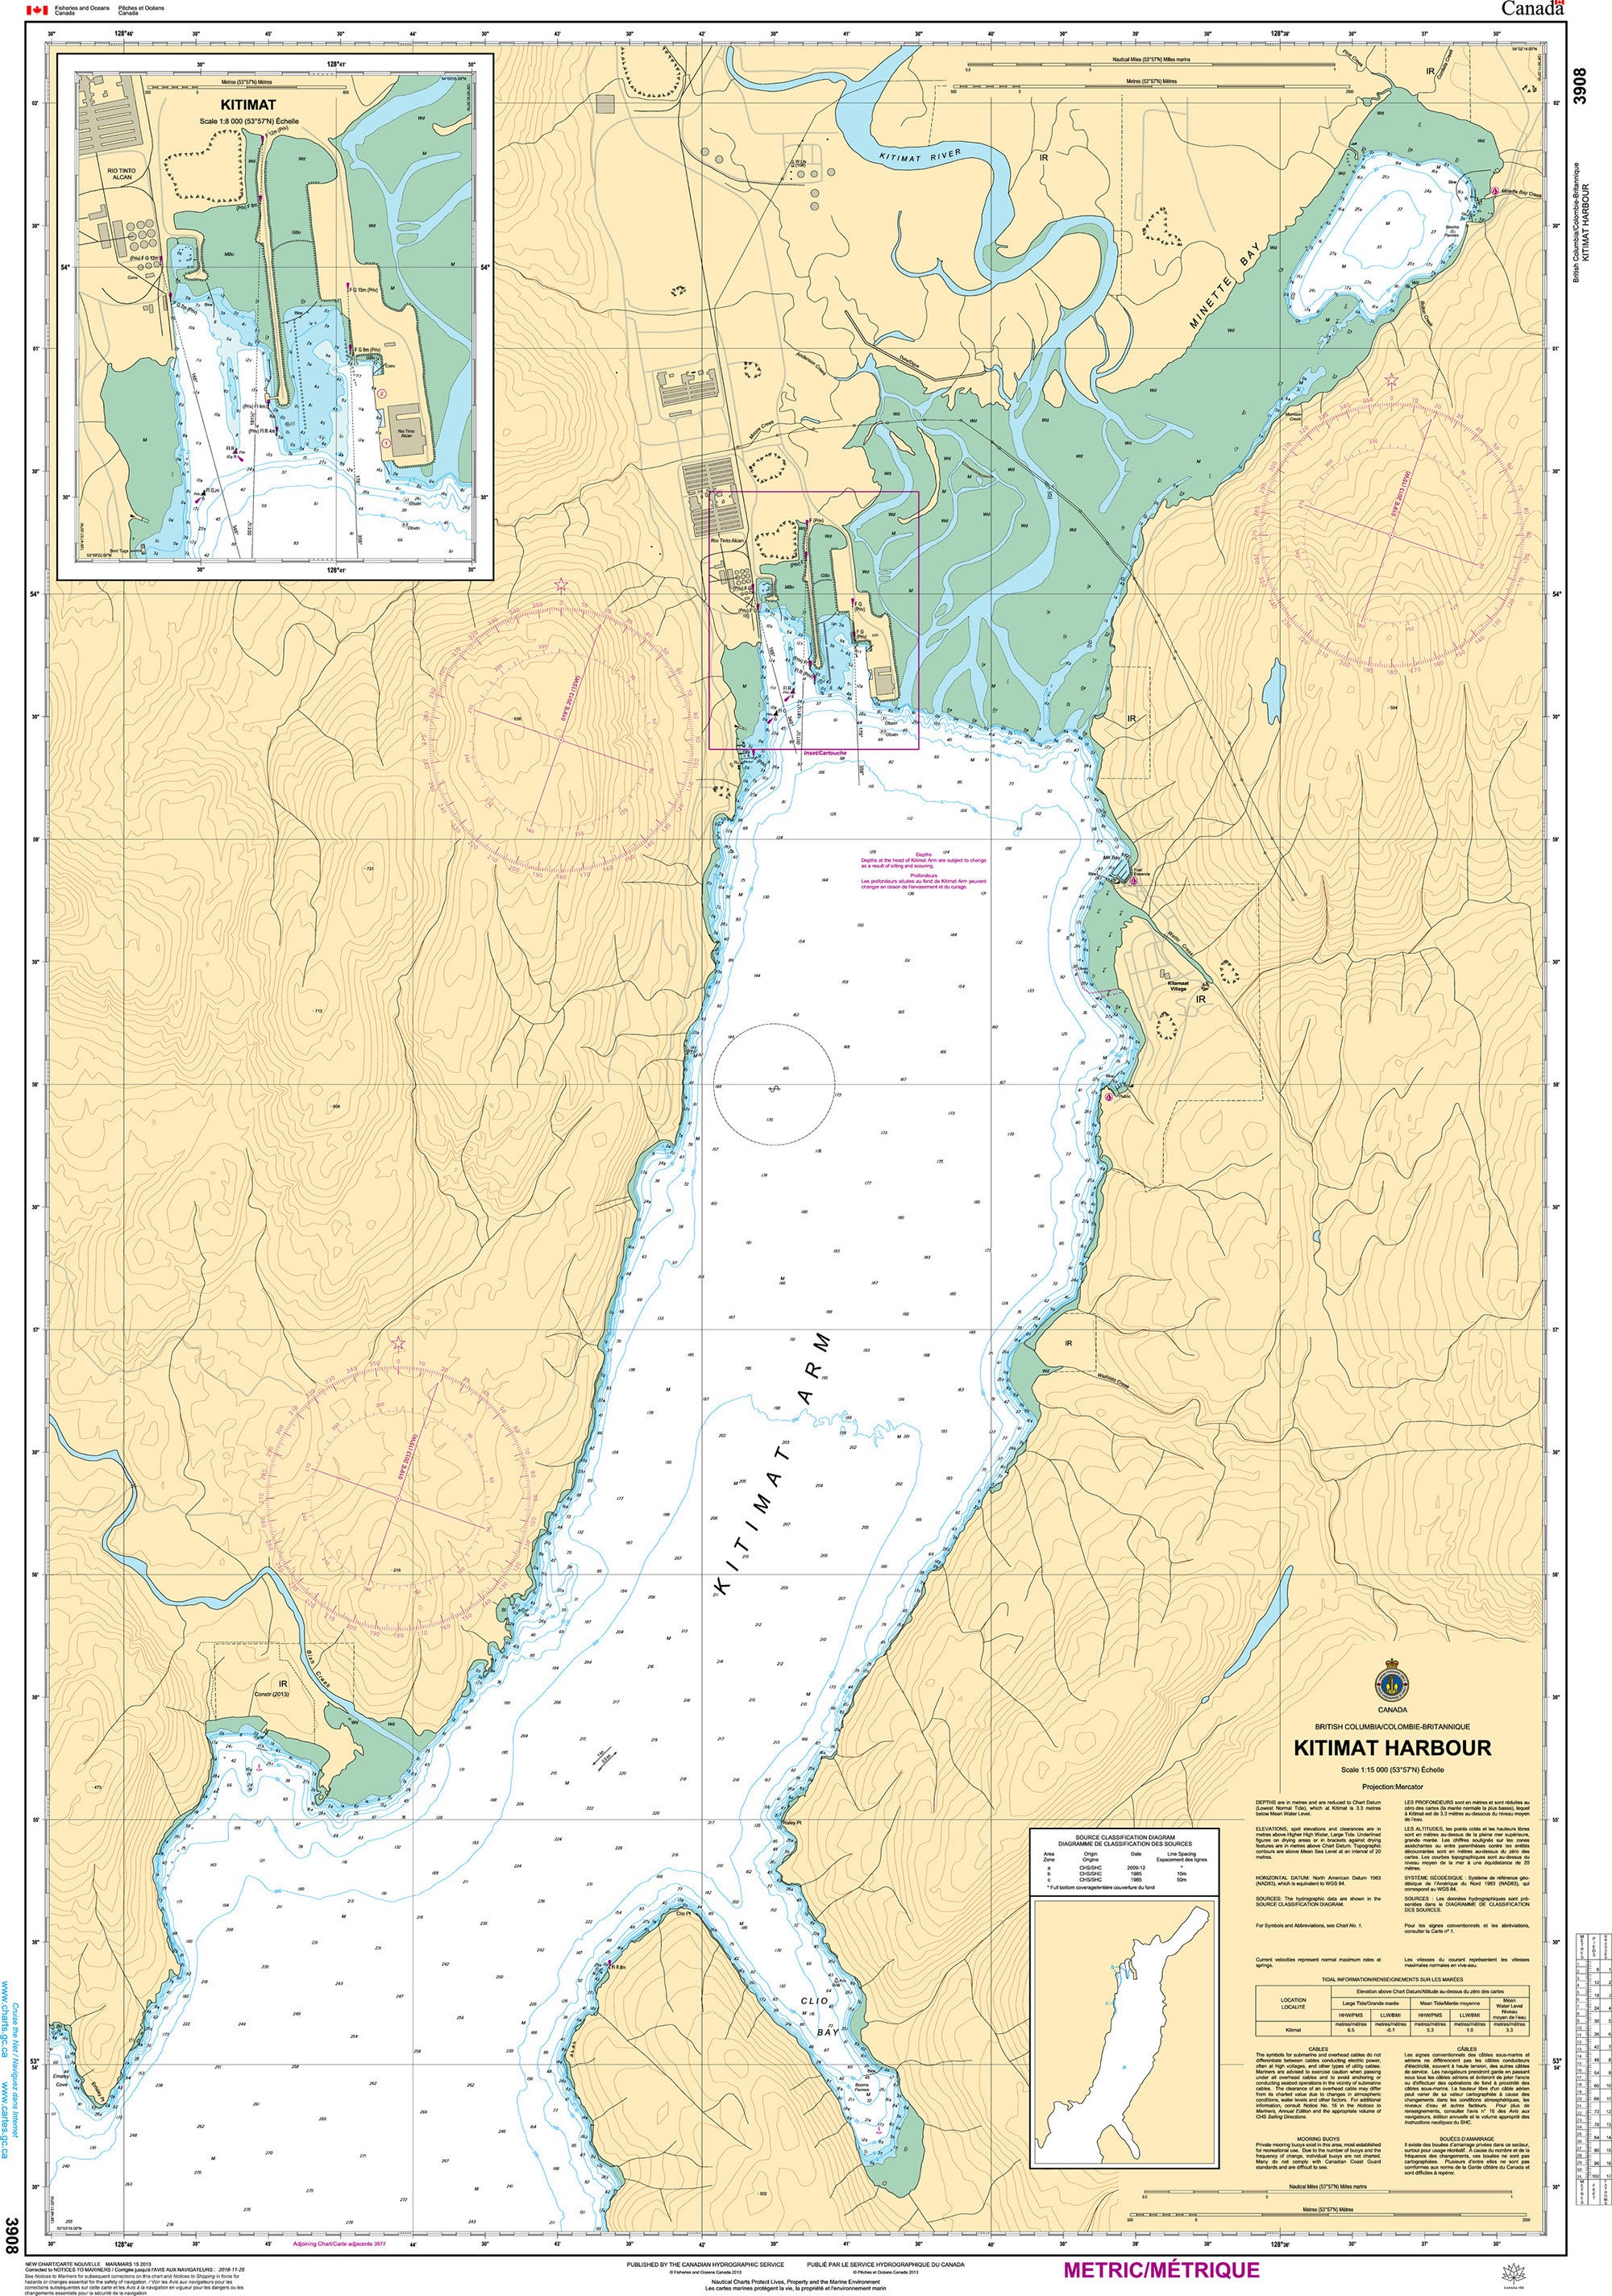 Canadian Hydrographic Service Nautical Chart CHS3908: Kitimat Harbour